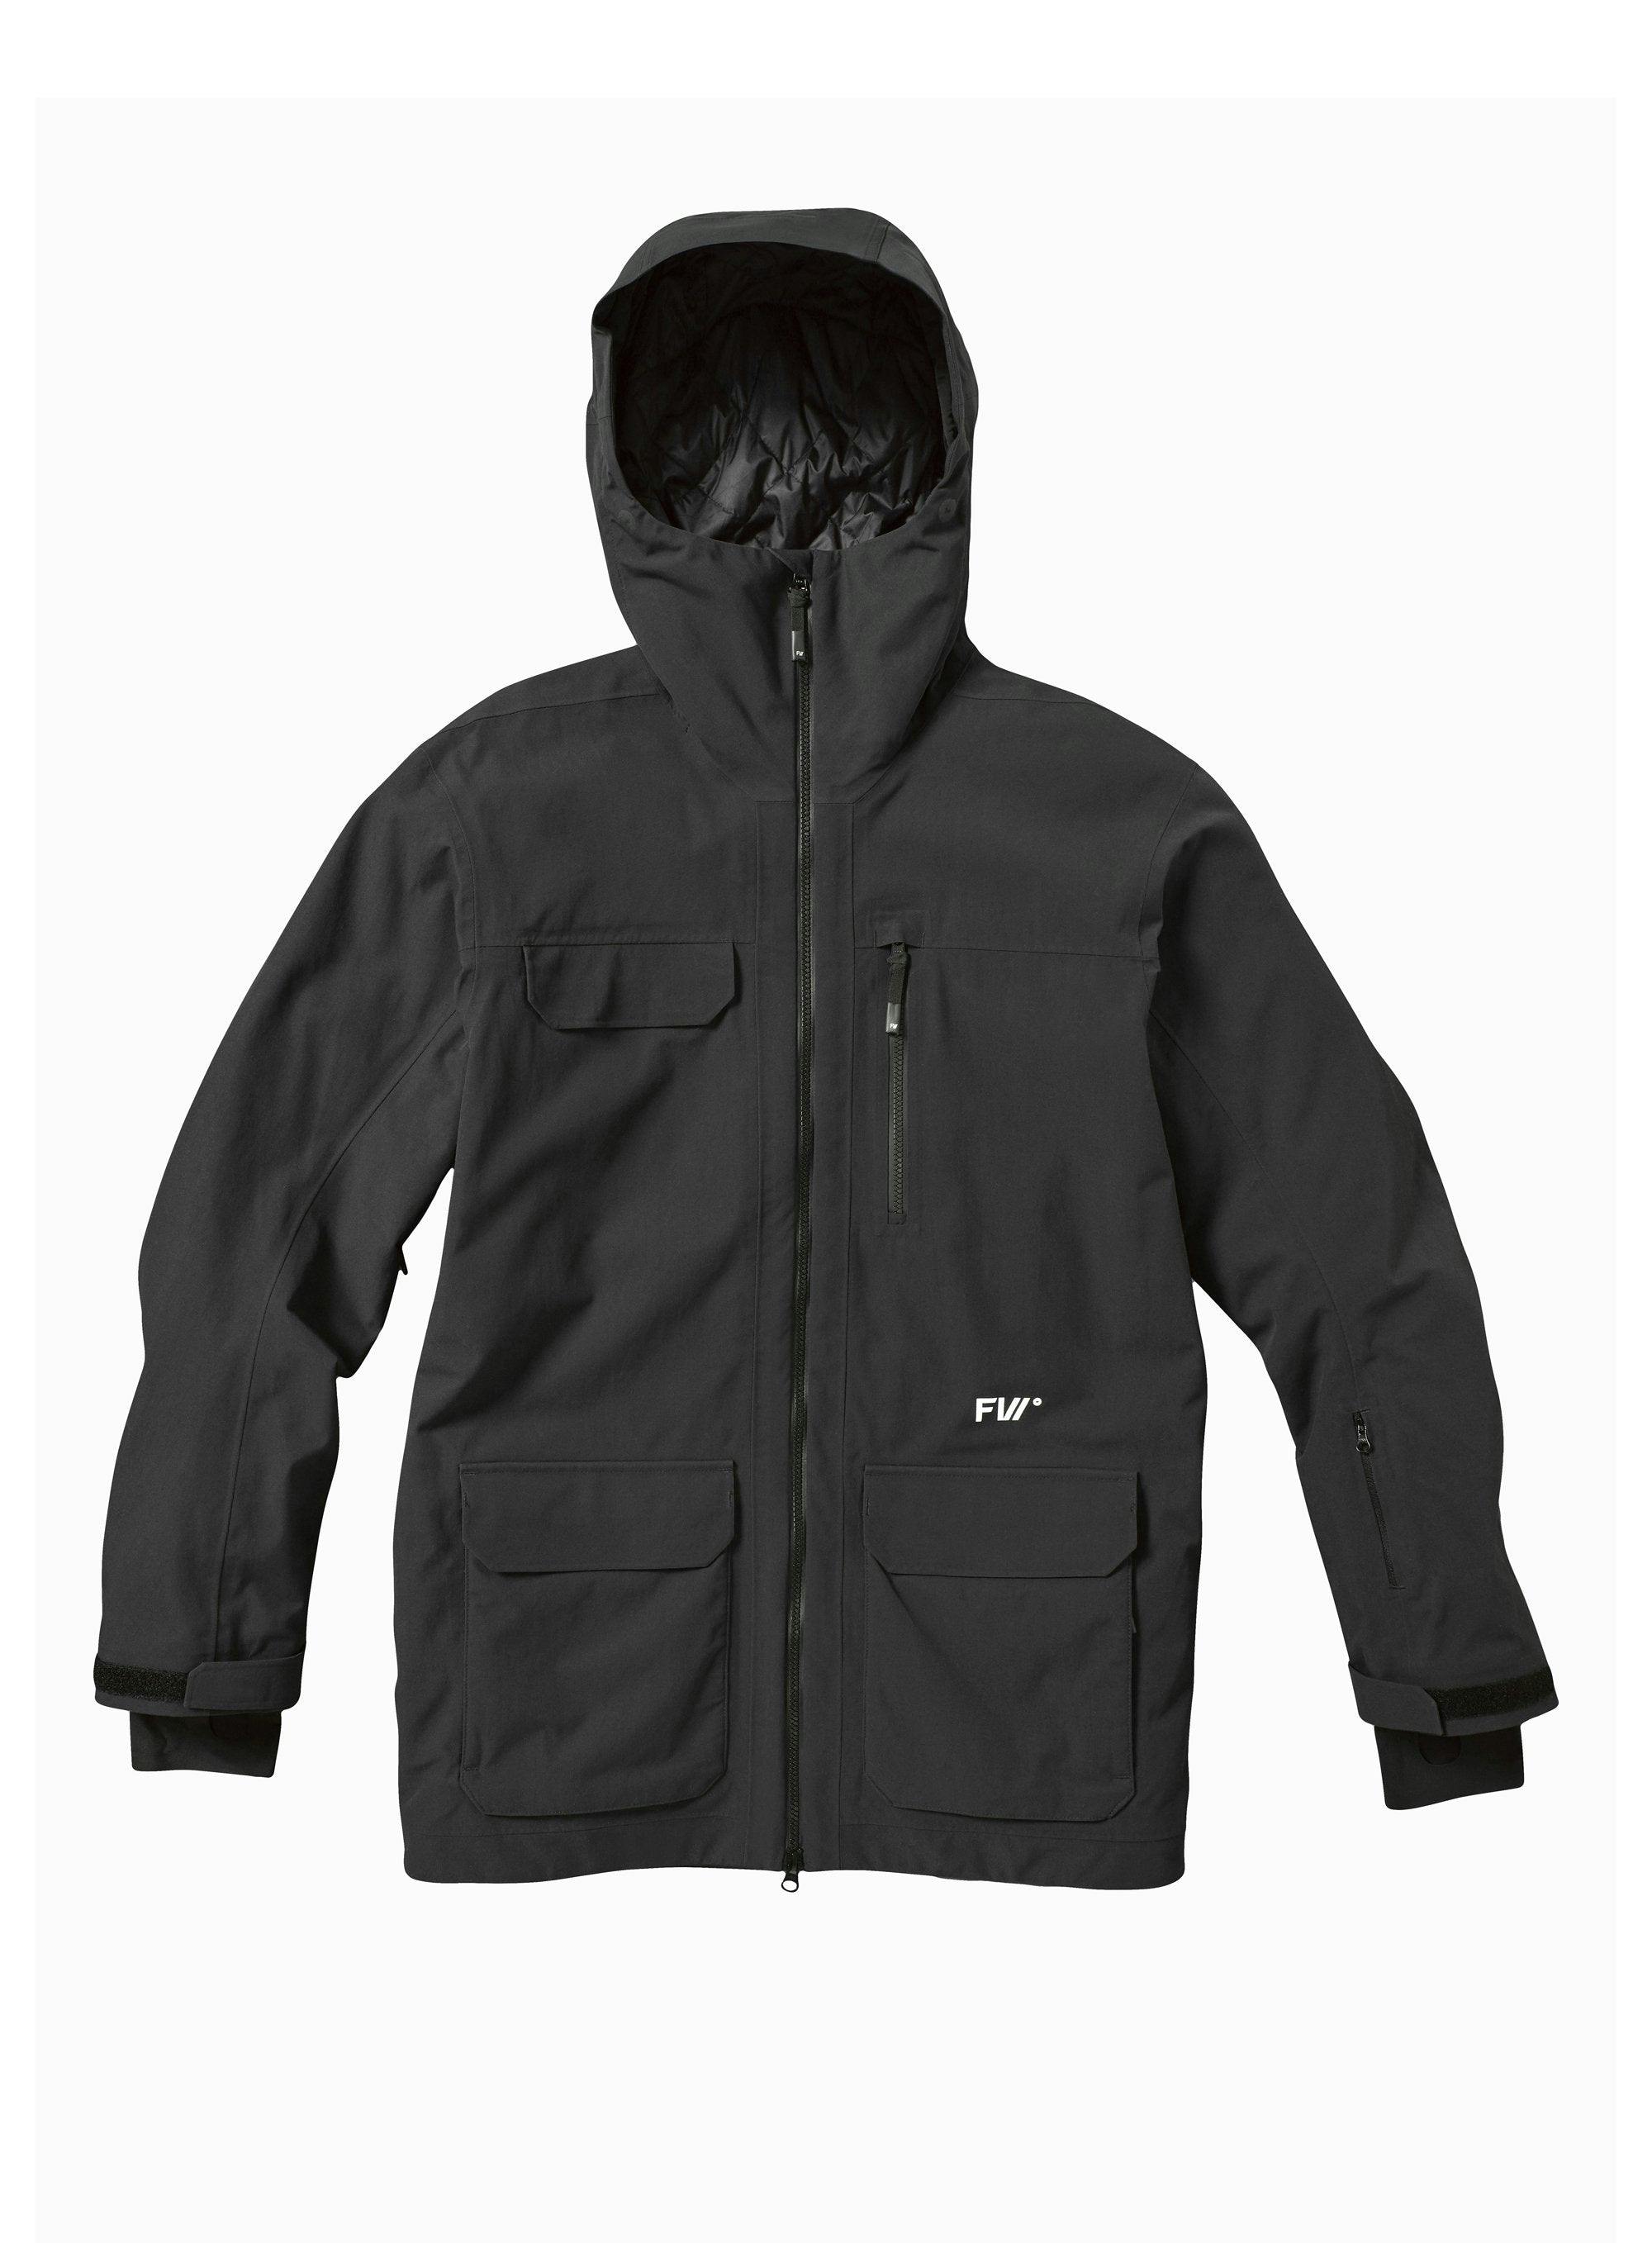 FW CATALYST 2L Insulated Jacket